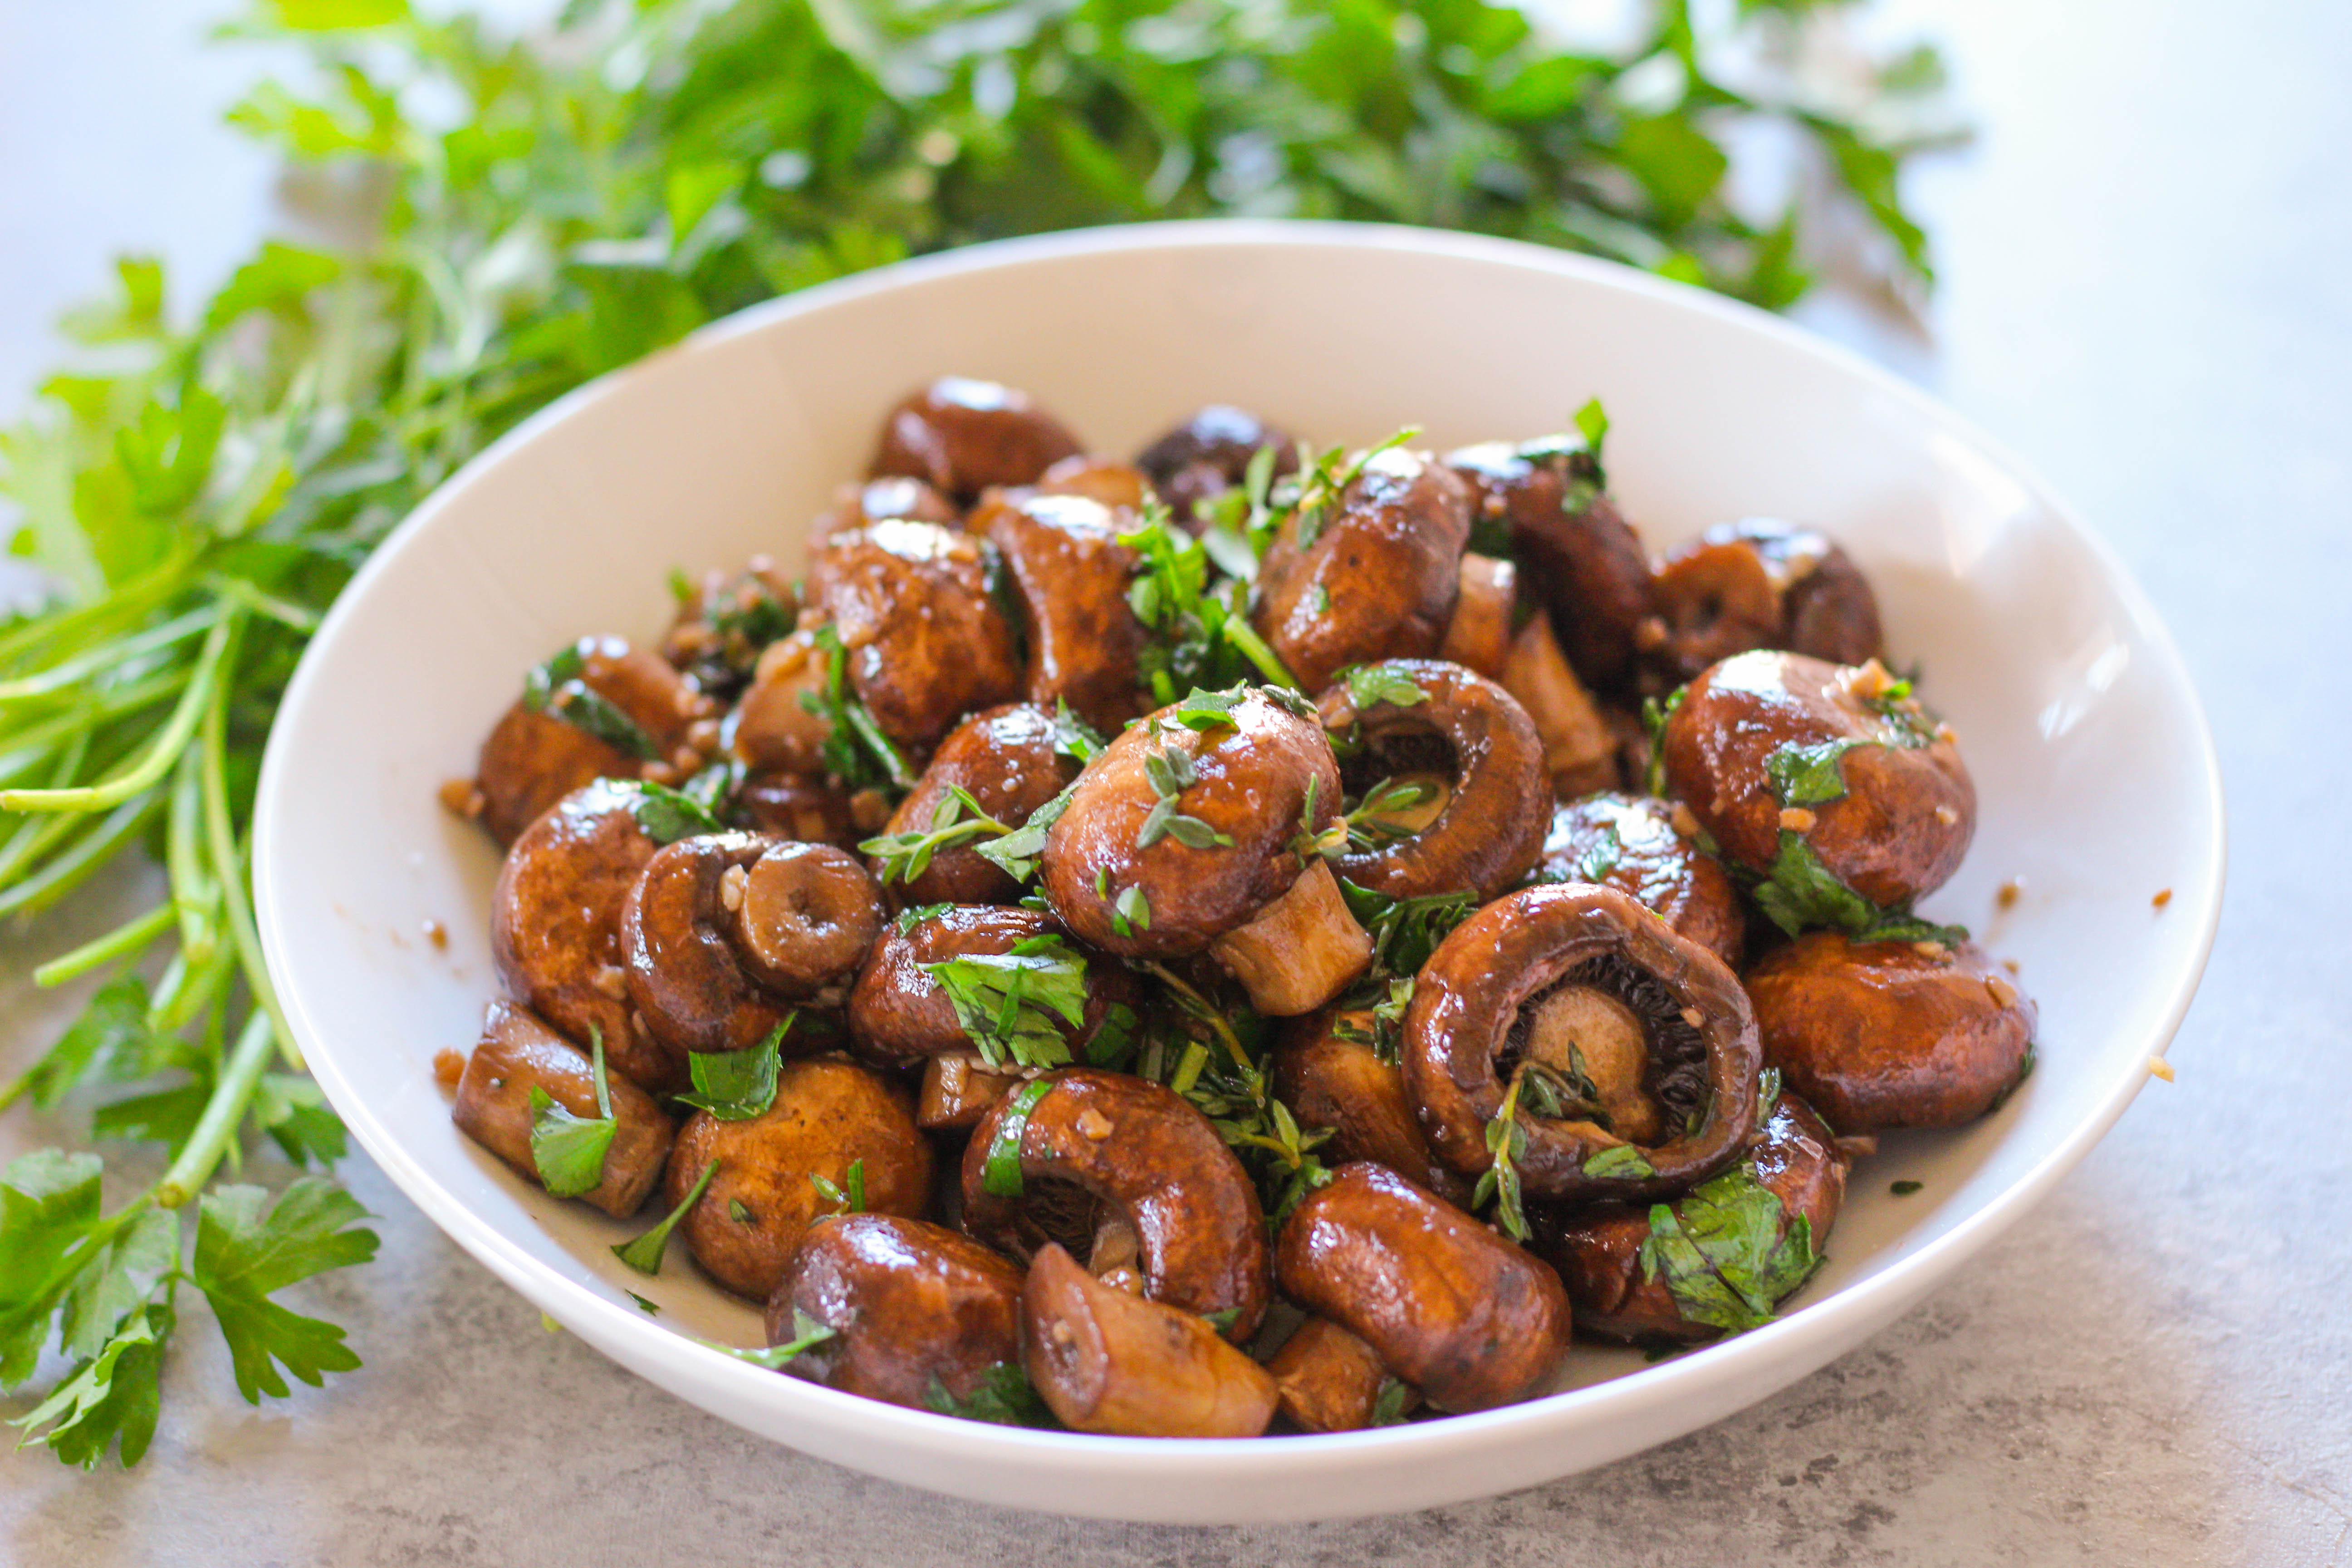 Sauteed Mushrooms In Ghee Herb Sauce Side Dish Zen Spice,Planting Tomatoes Upside Down